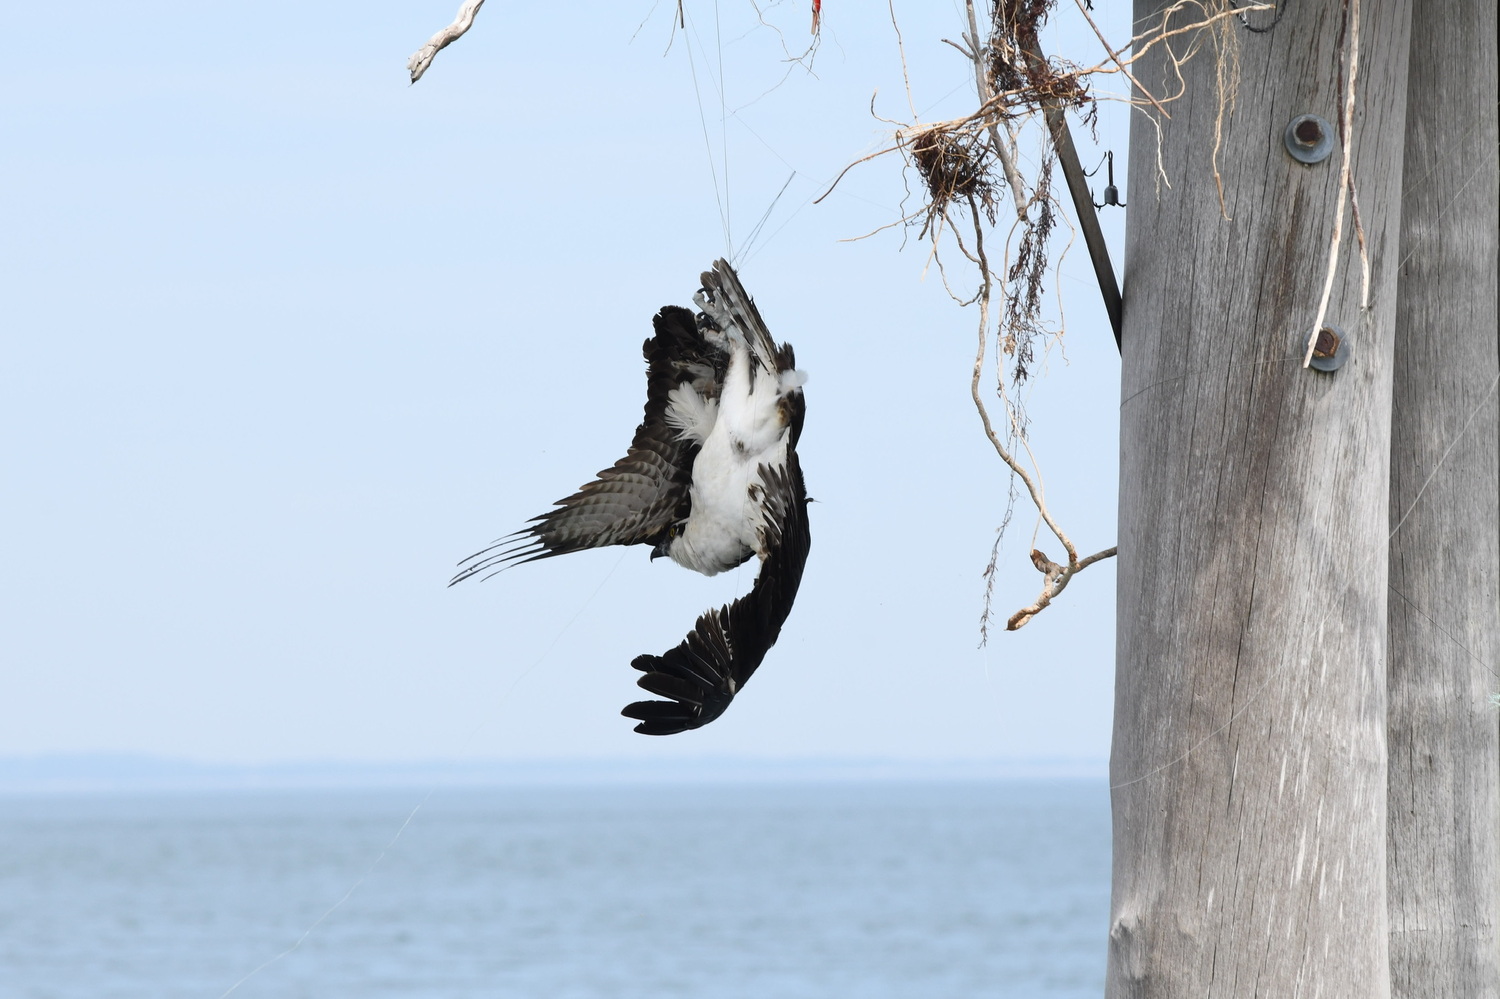 The osprey was tangled in fishing line that may have been wound into the material of the nest it built near a popular fishing spot. DOUG KUNTZ